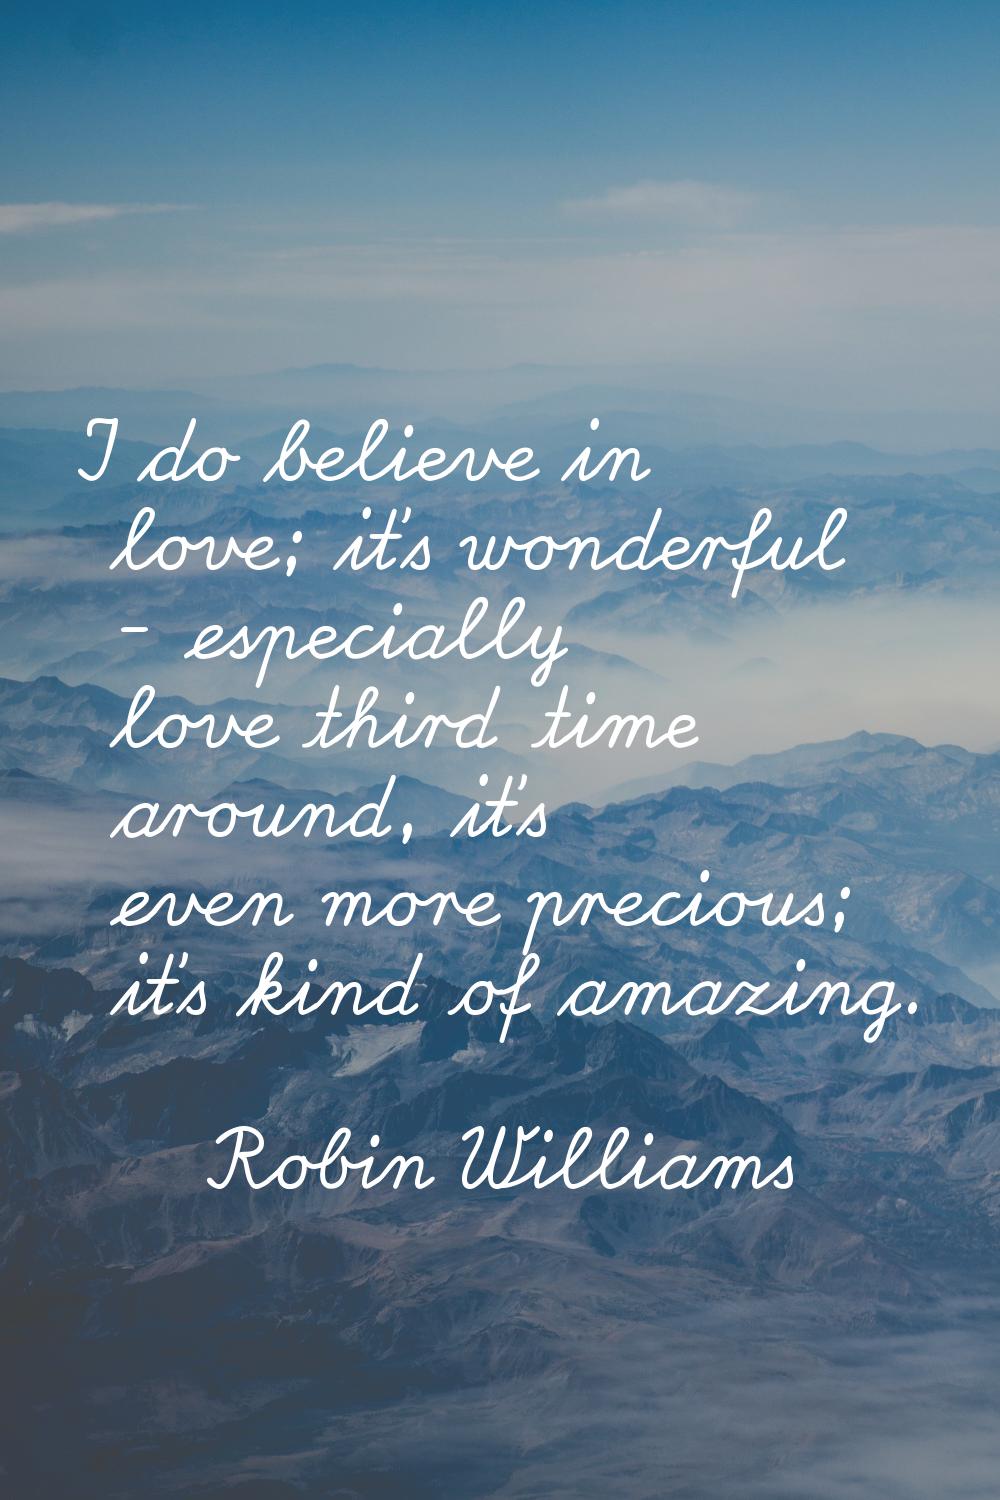 I do believe in love; it's wonderful - especially love third time around, it's even more precious; 